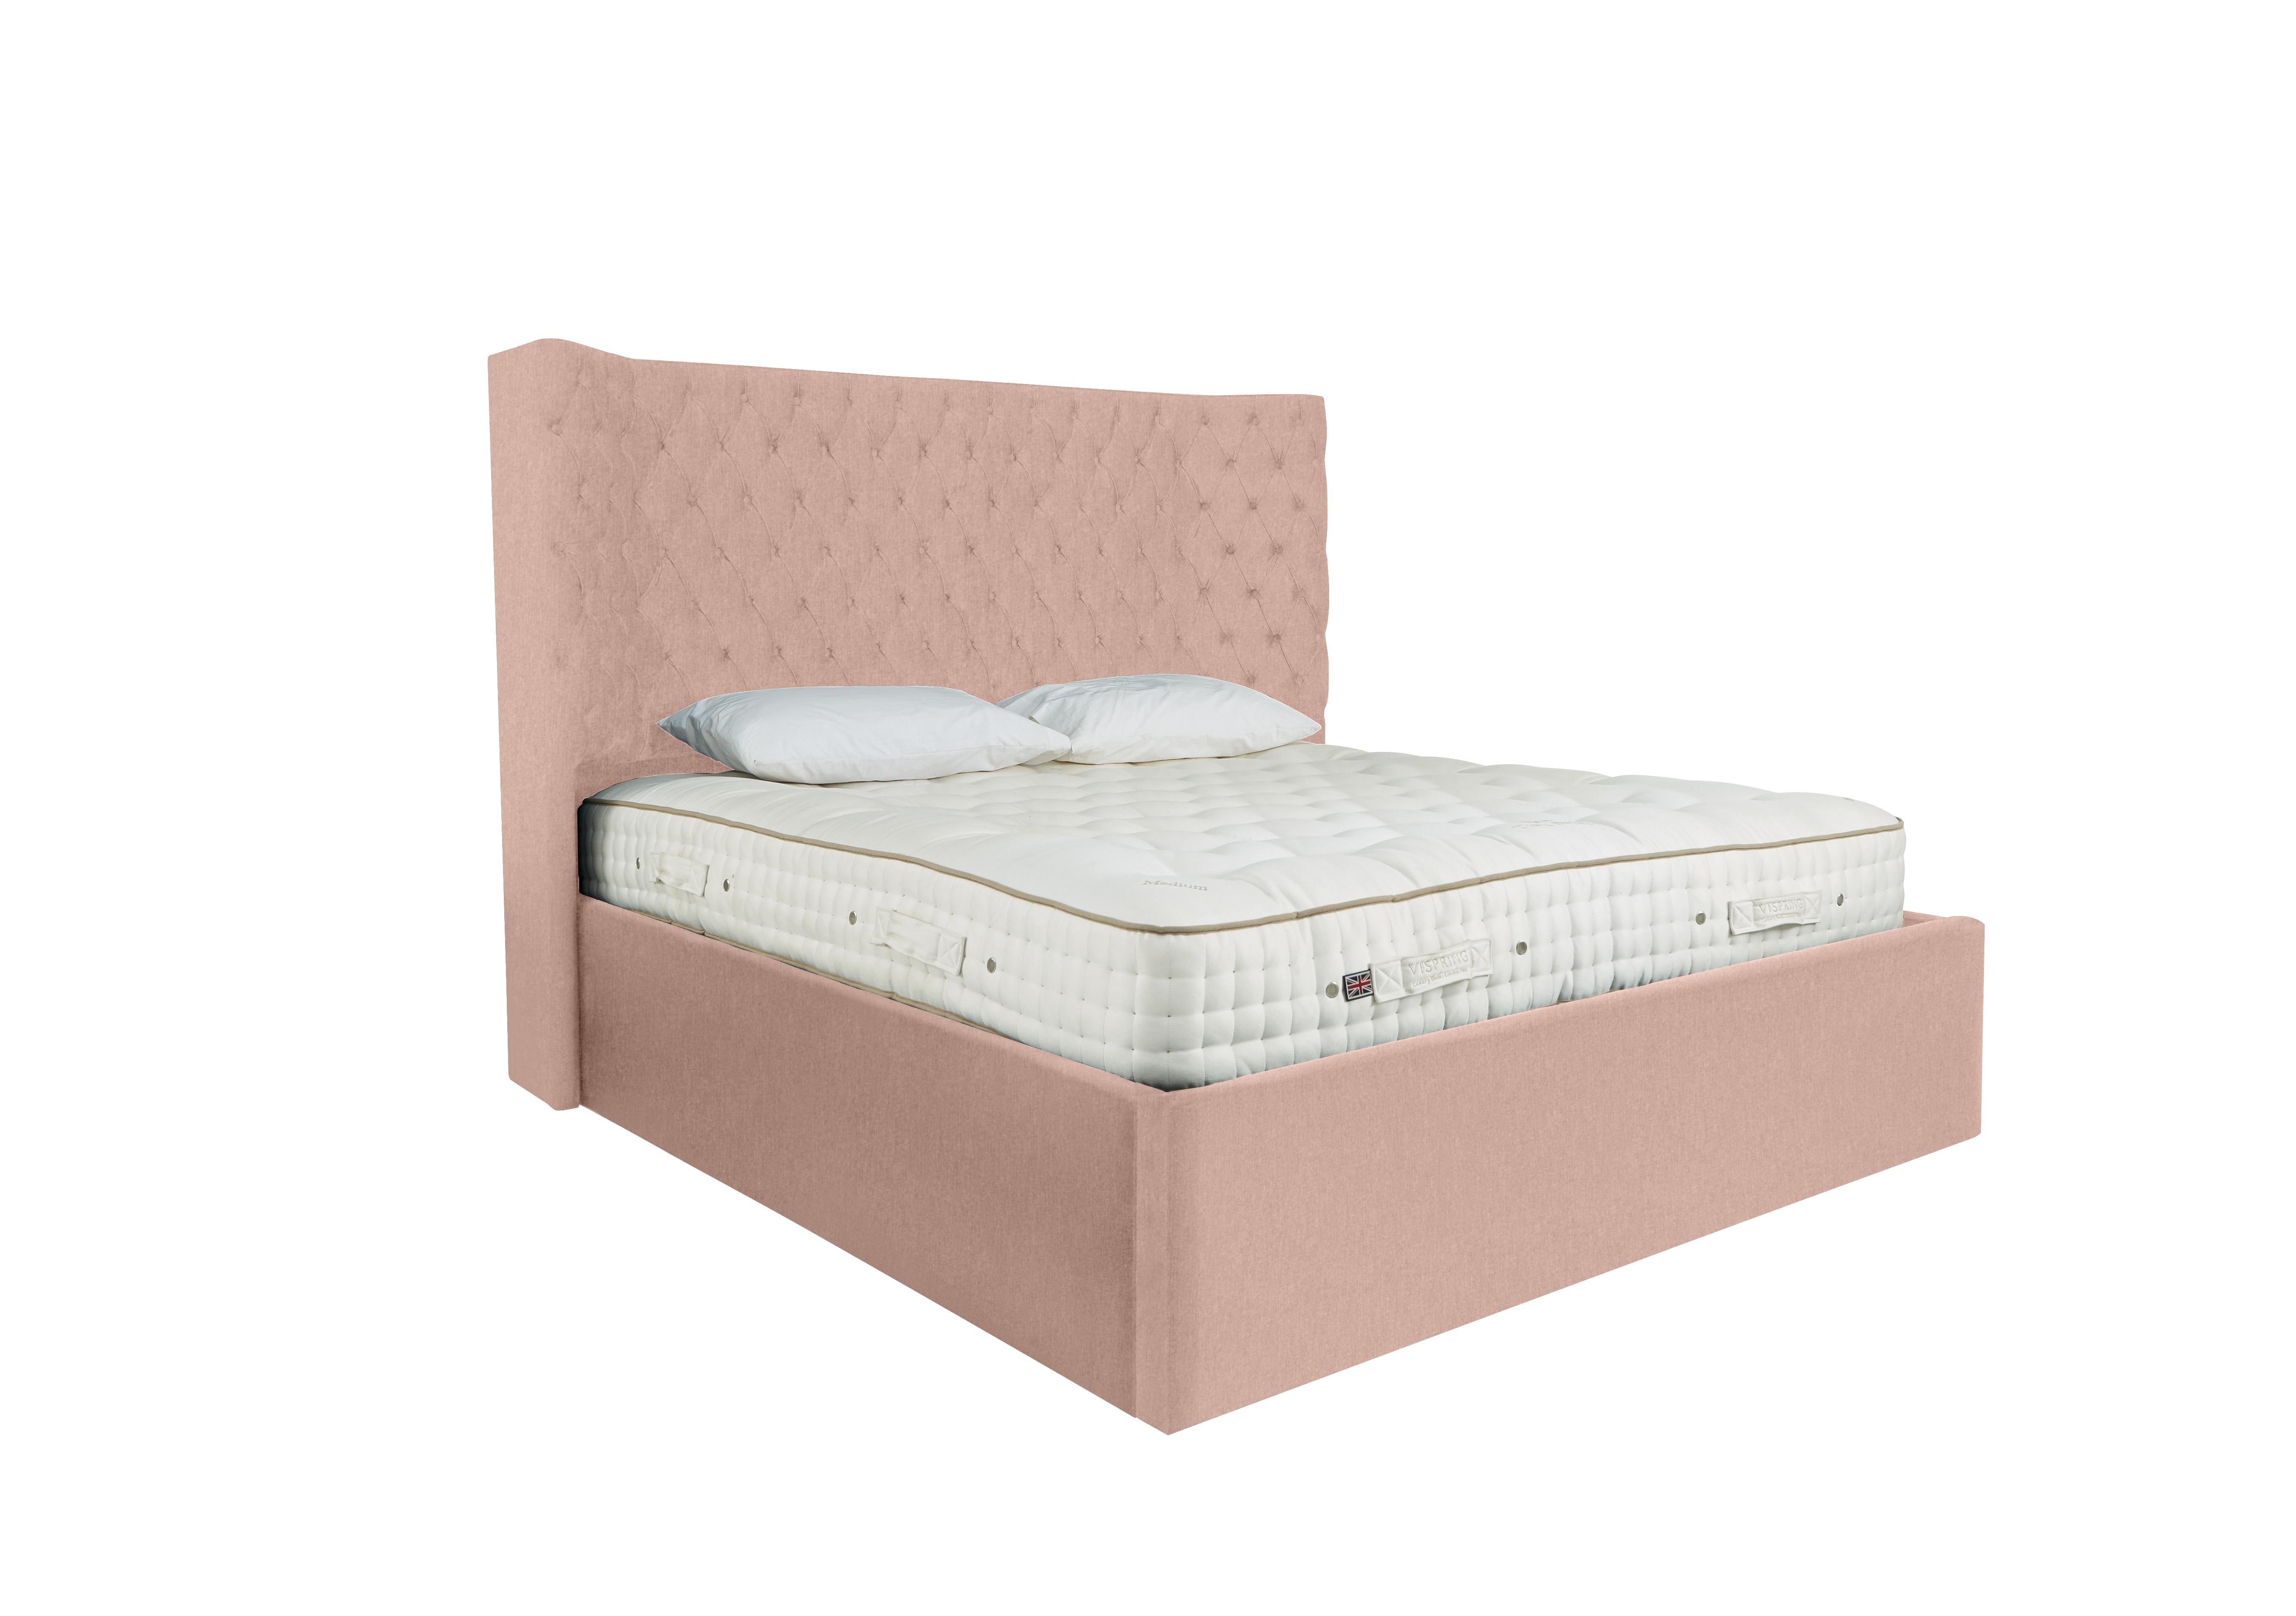 Maximus Ottoman Bed Frame in Linnet Rose on Furniture Village